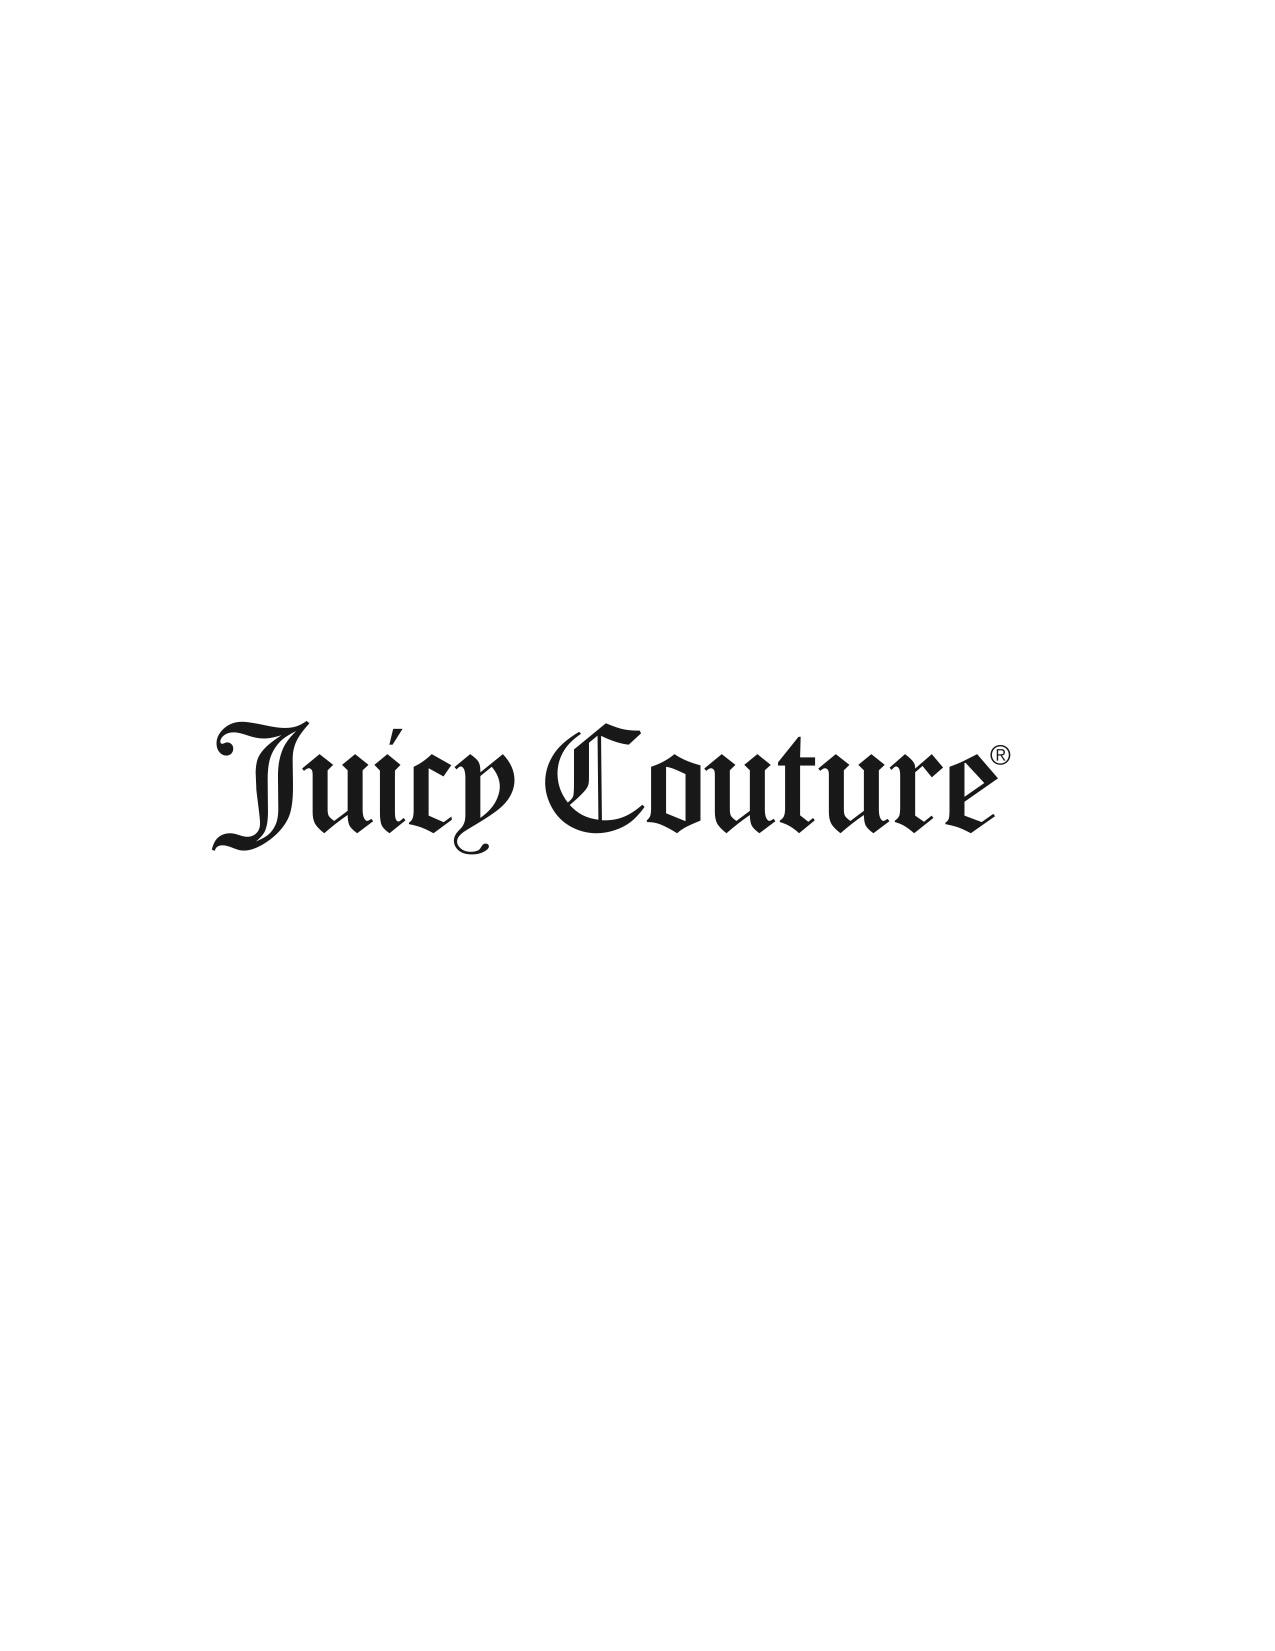 Juicy Couture - fashionabc